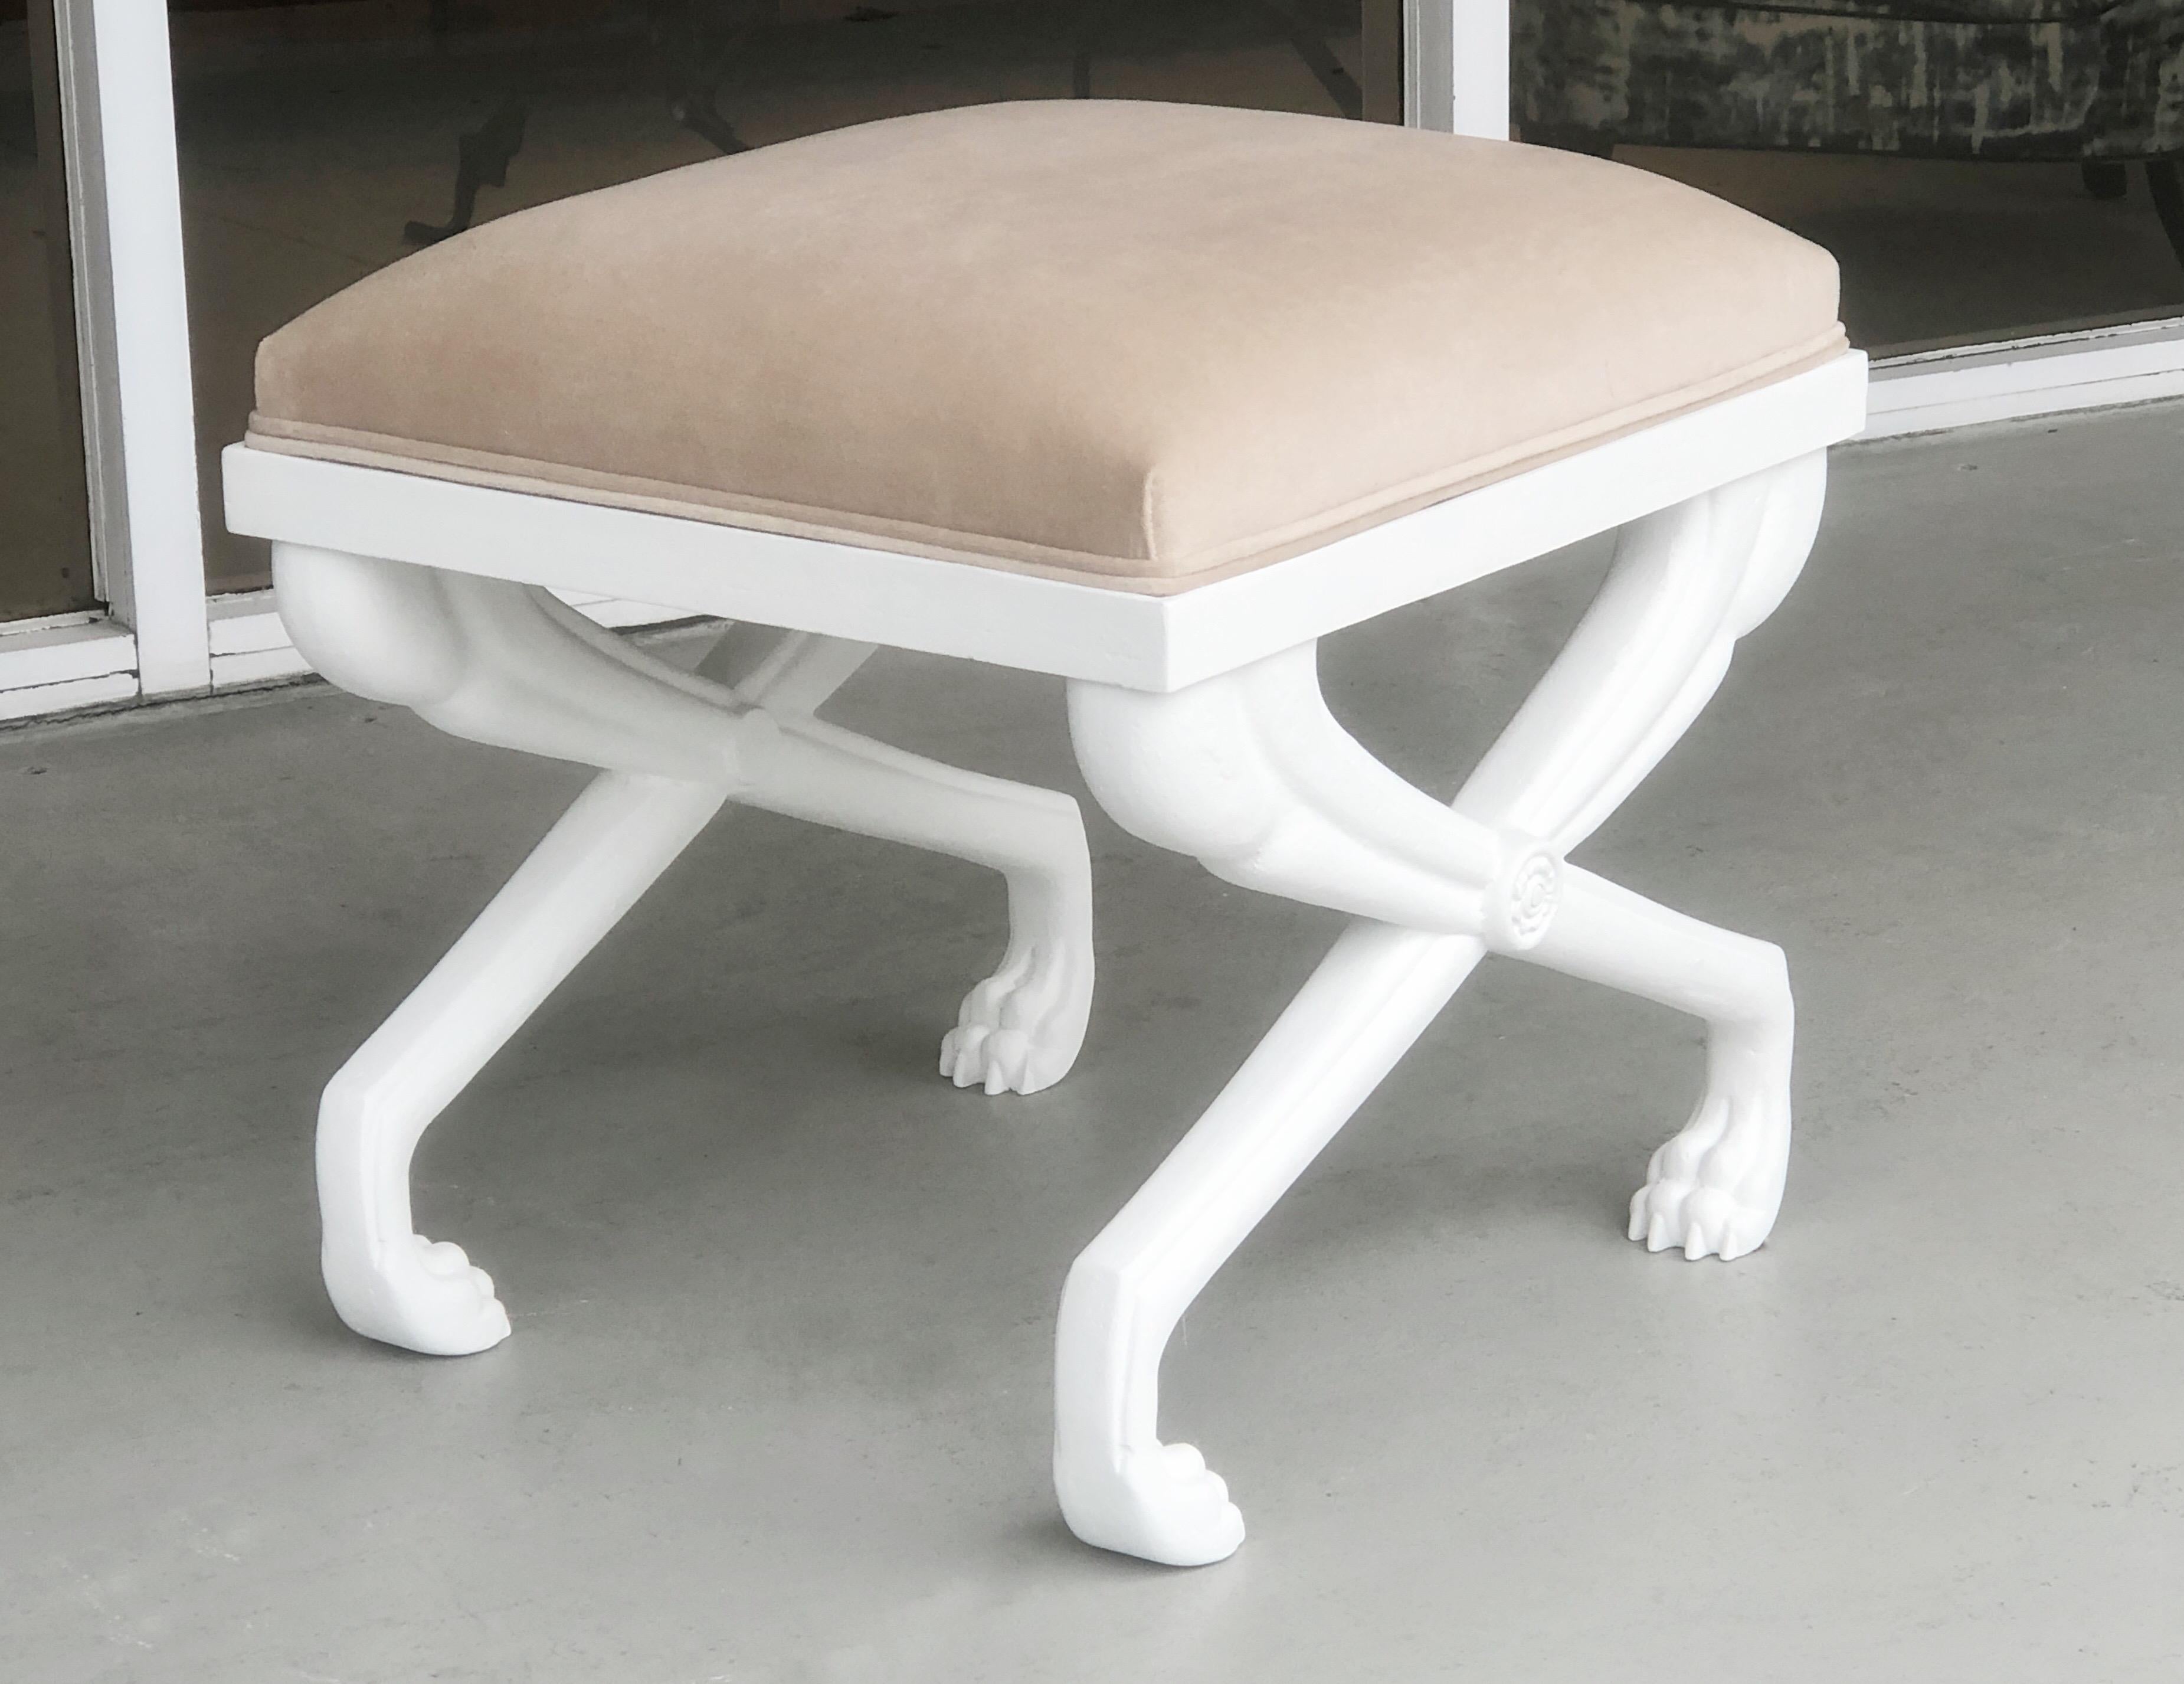 A solid cast metal bench or stool with a white finish. Upholstered seat. Nice detail and striking design.